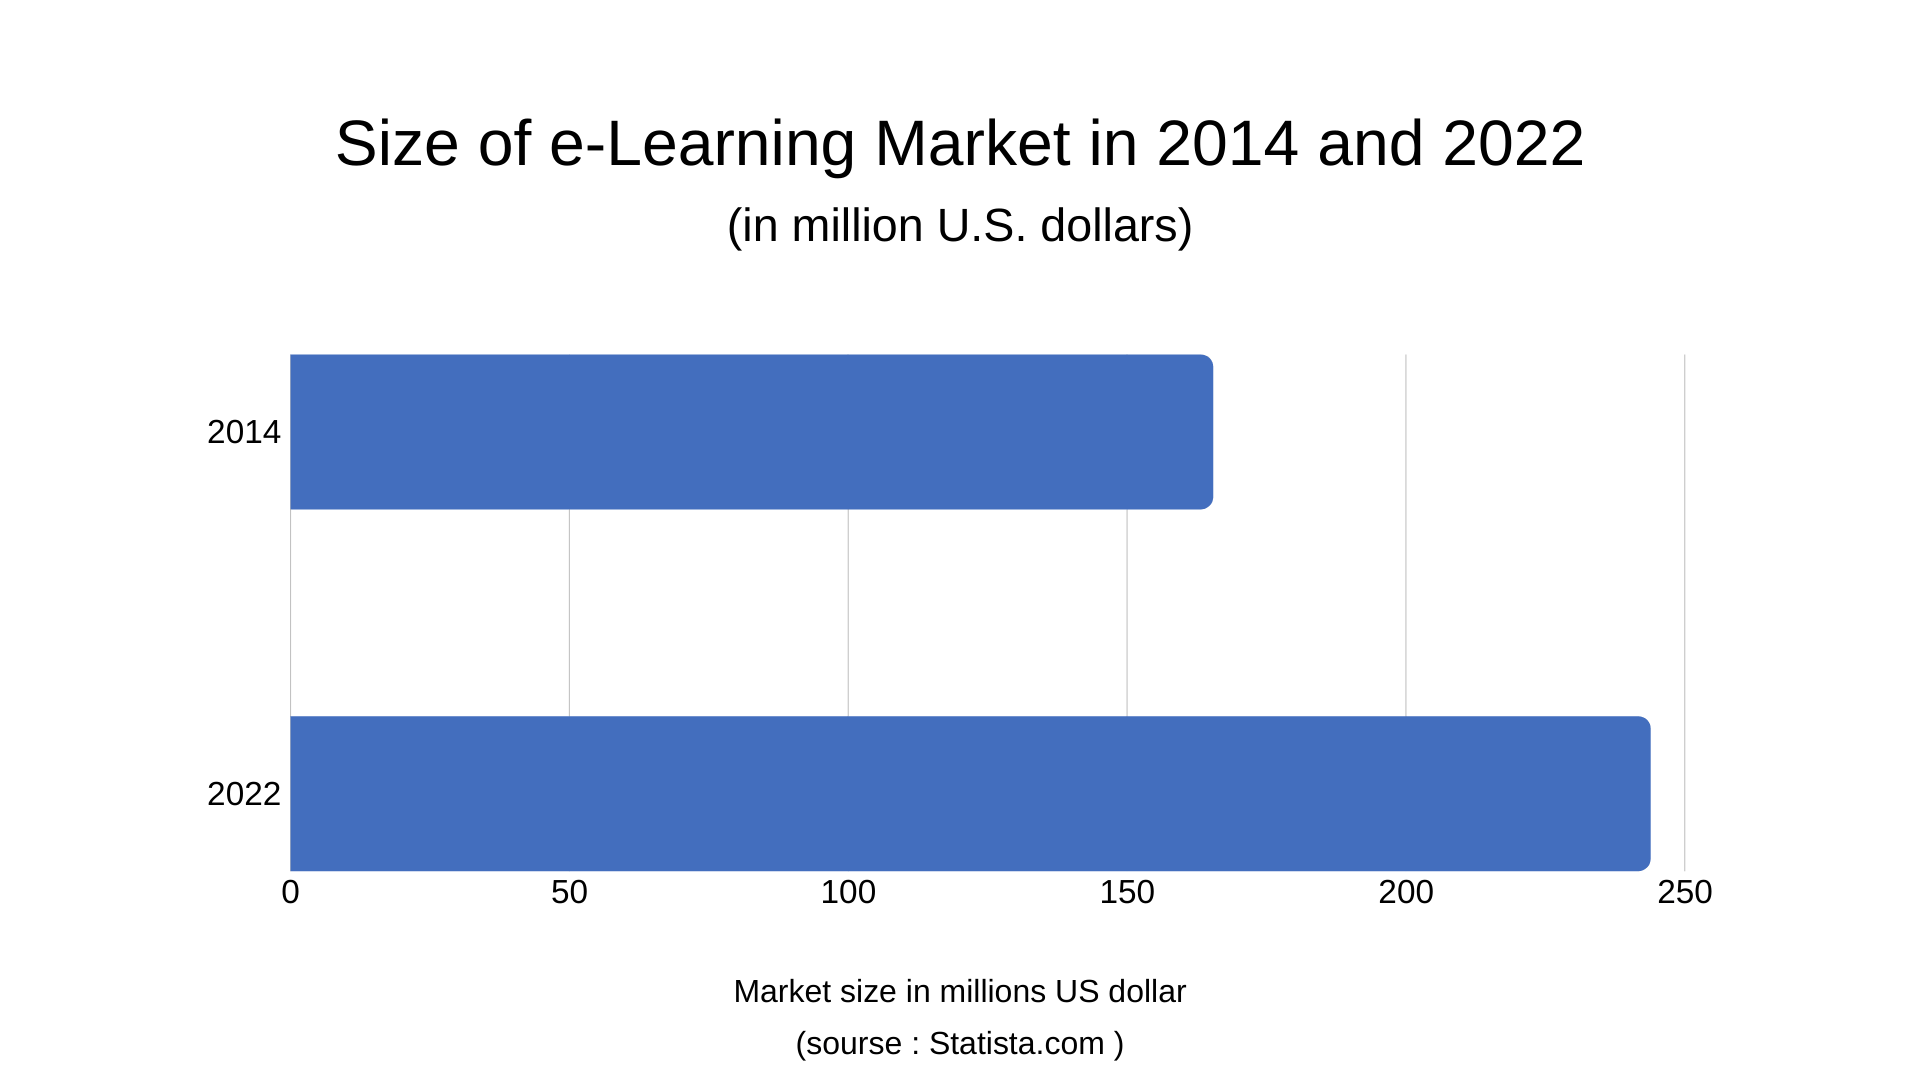 Size of e-Learning Market in 2014 and 2022